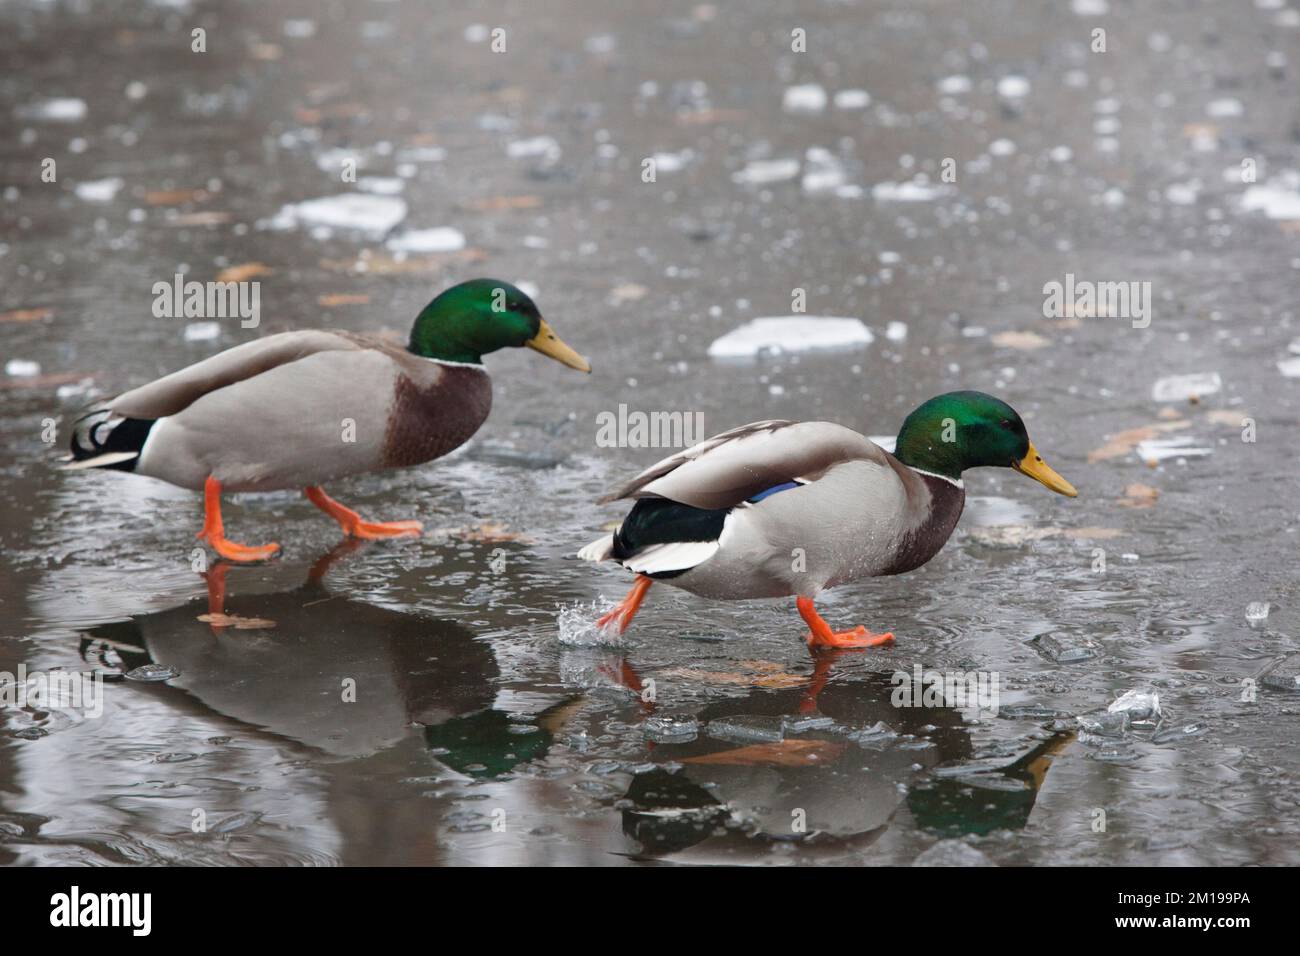 London, UK, 11 December 2022: Freezing temperatures have brought thick fog and an unusually hard frost to London. On Wandsworth Common ducks slip and slide on an icy pond. Anna Watson/Alamy Live News Stock Photo